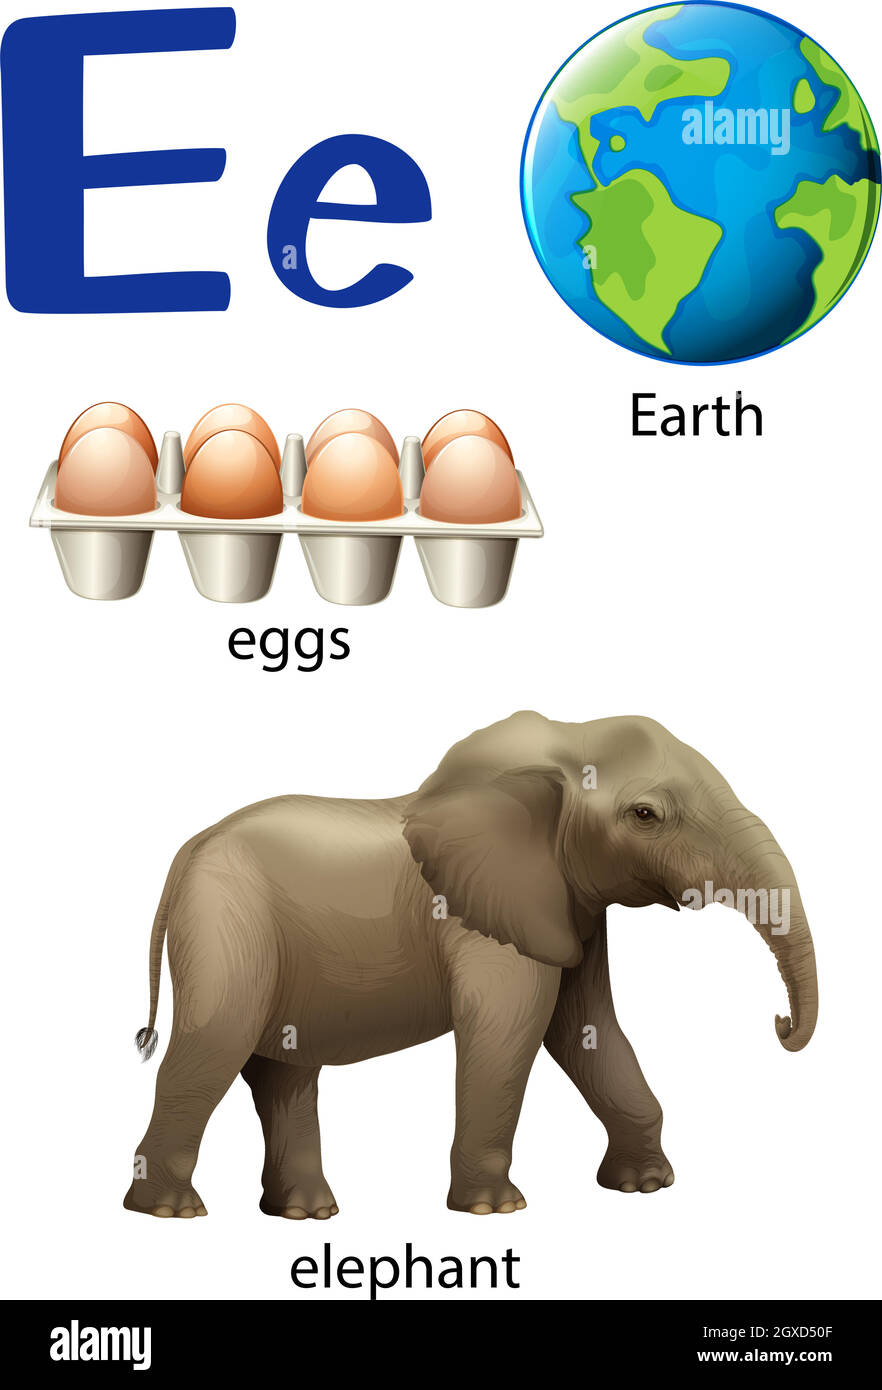 Letter E for Earth, eggs and elephant Stock Vector